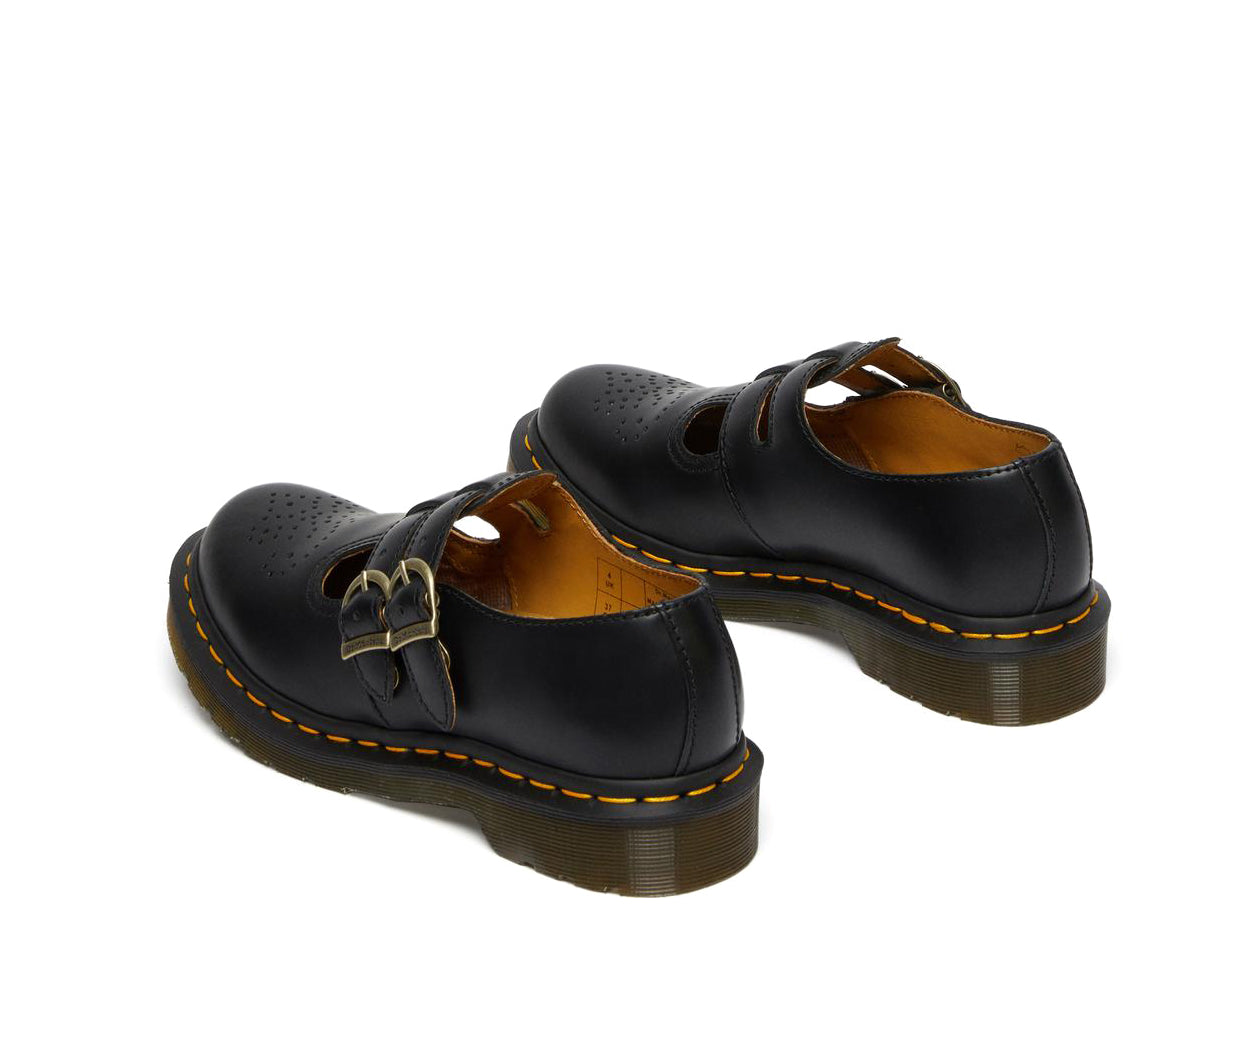 A black leather Dr. Martens mary jane shoe with brass buckles.